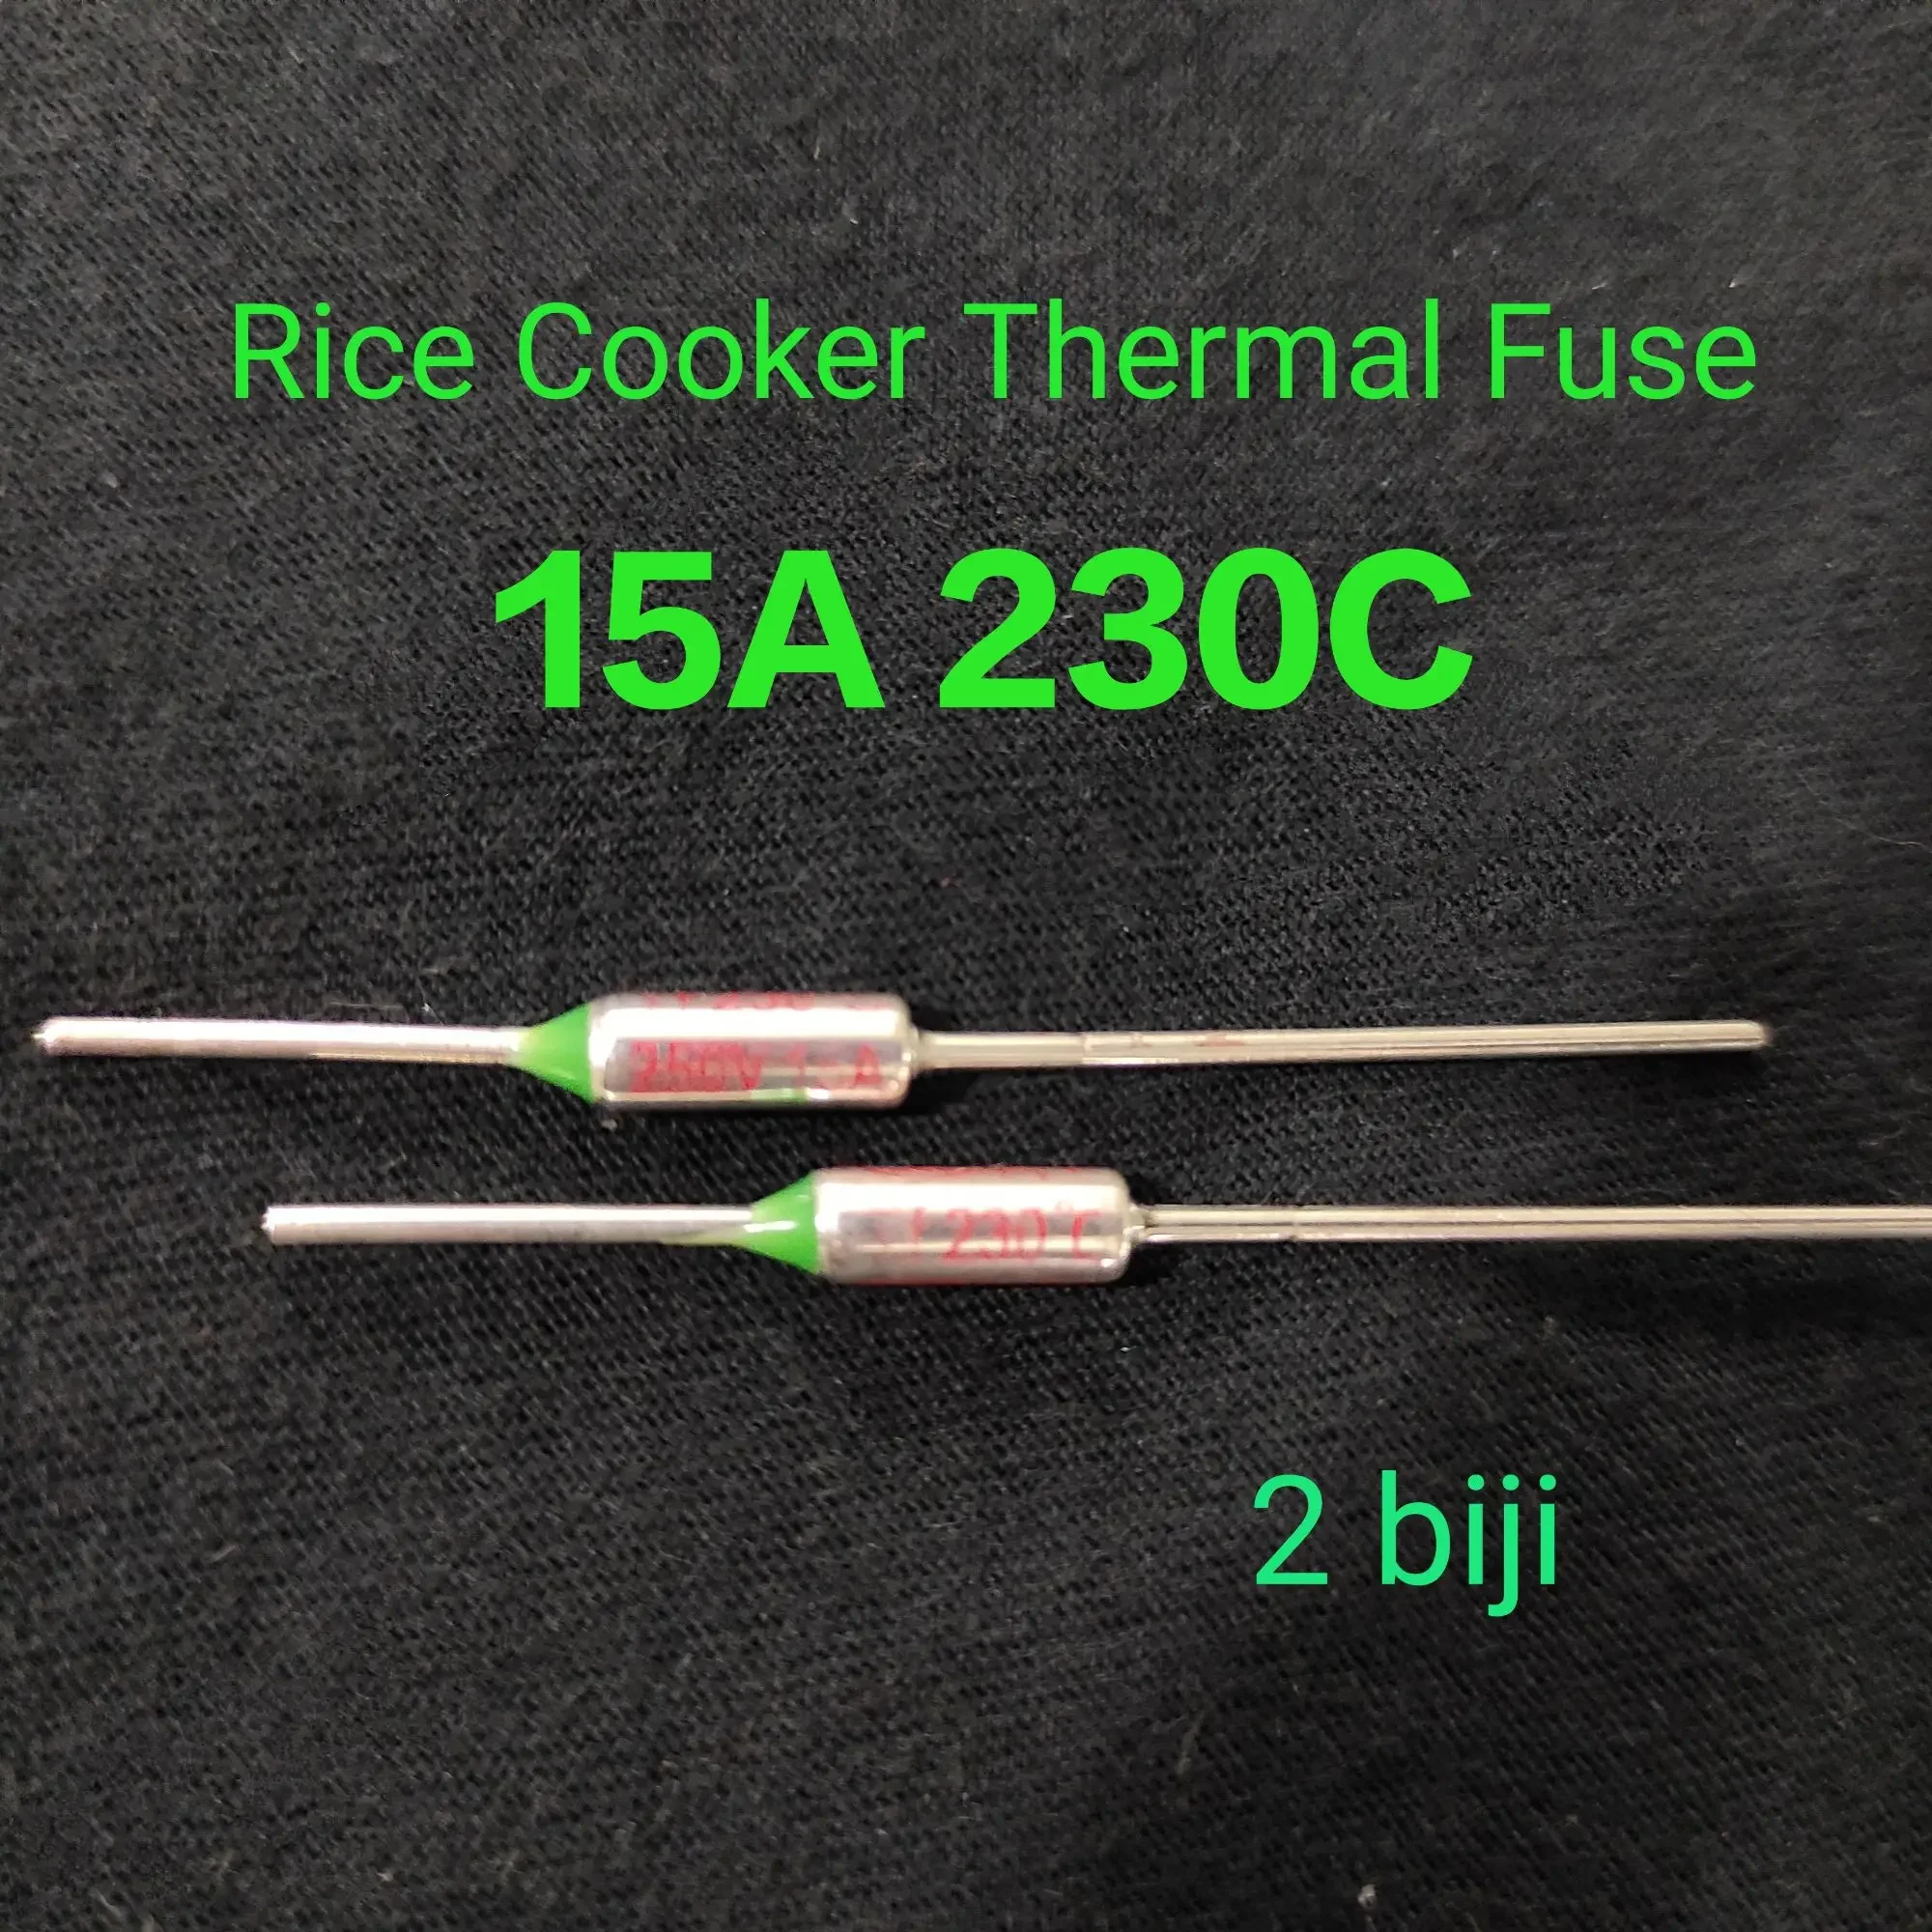 2 Biji 15A 230C 250v Rice Cooker Thermal Fuse Thermo Fuse 15a